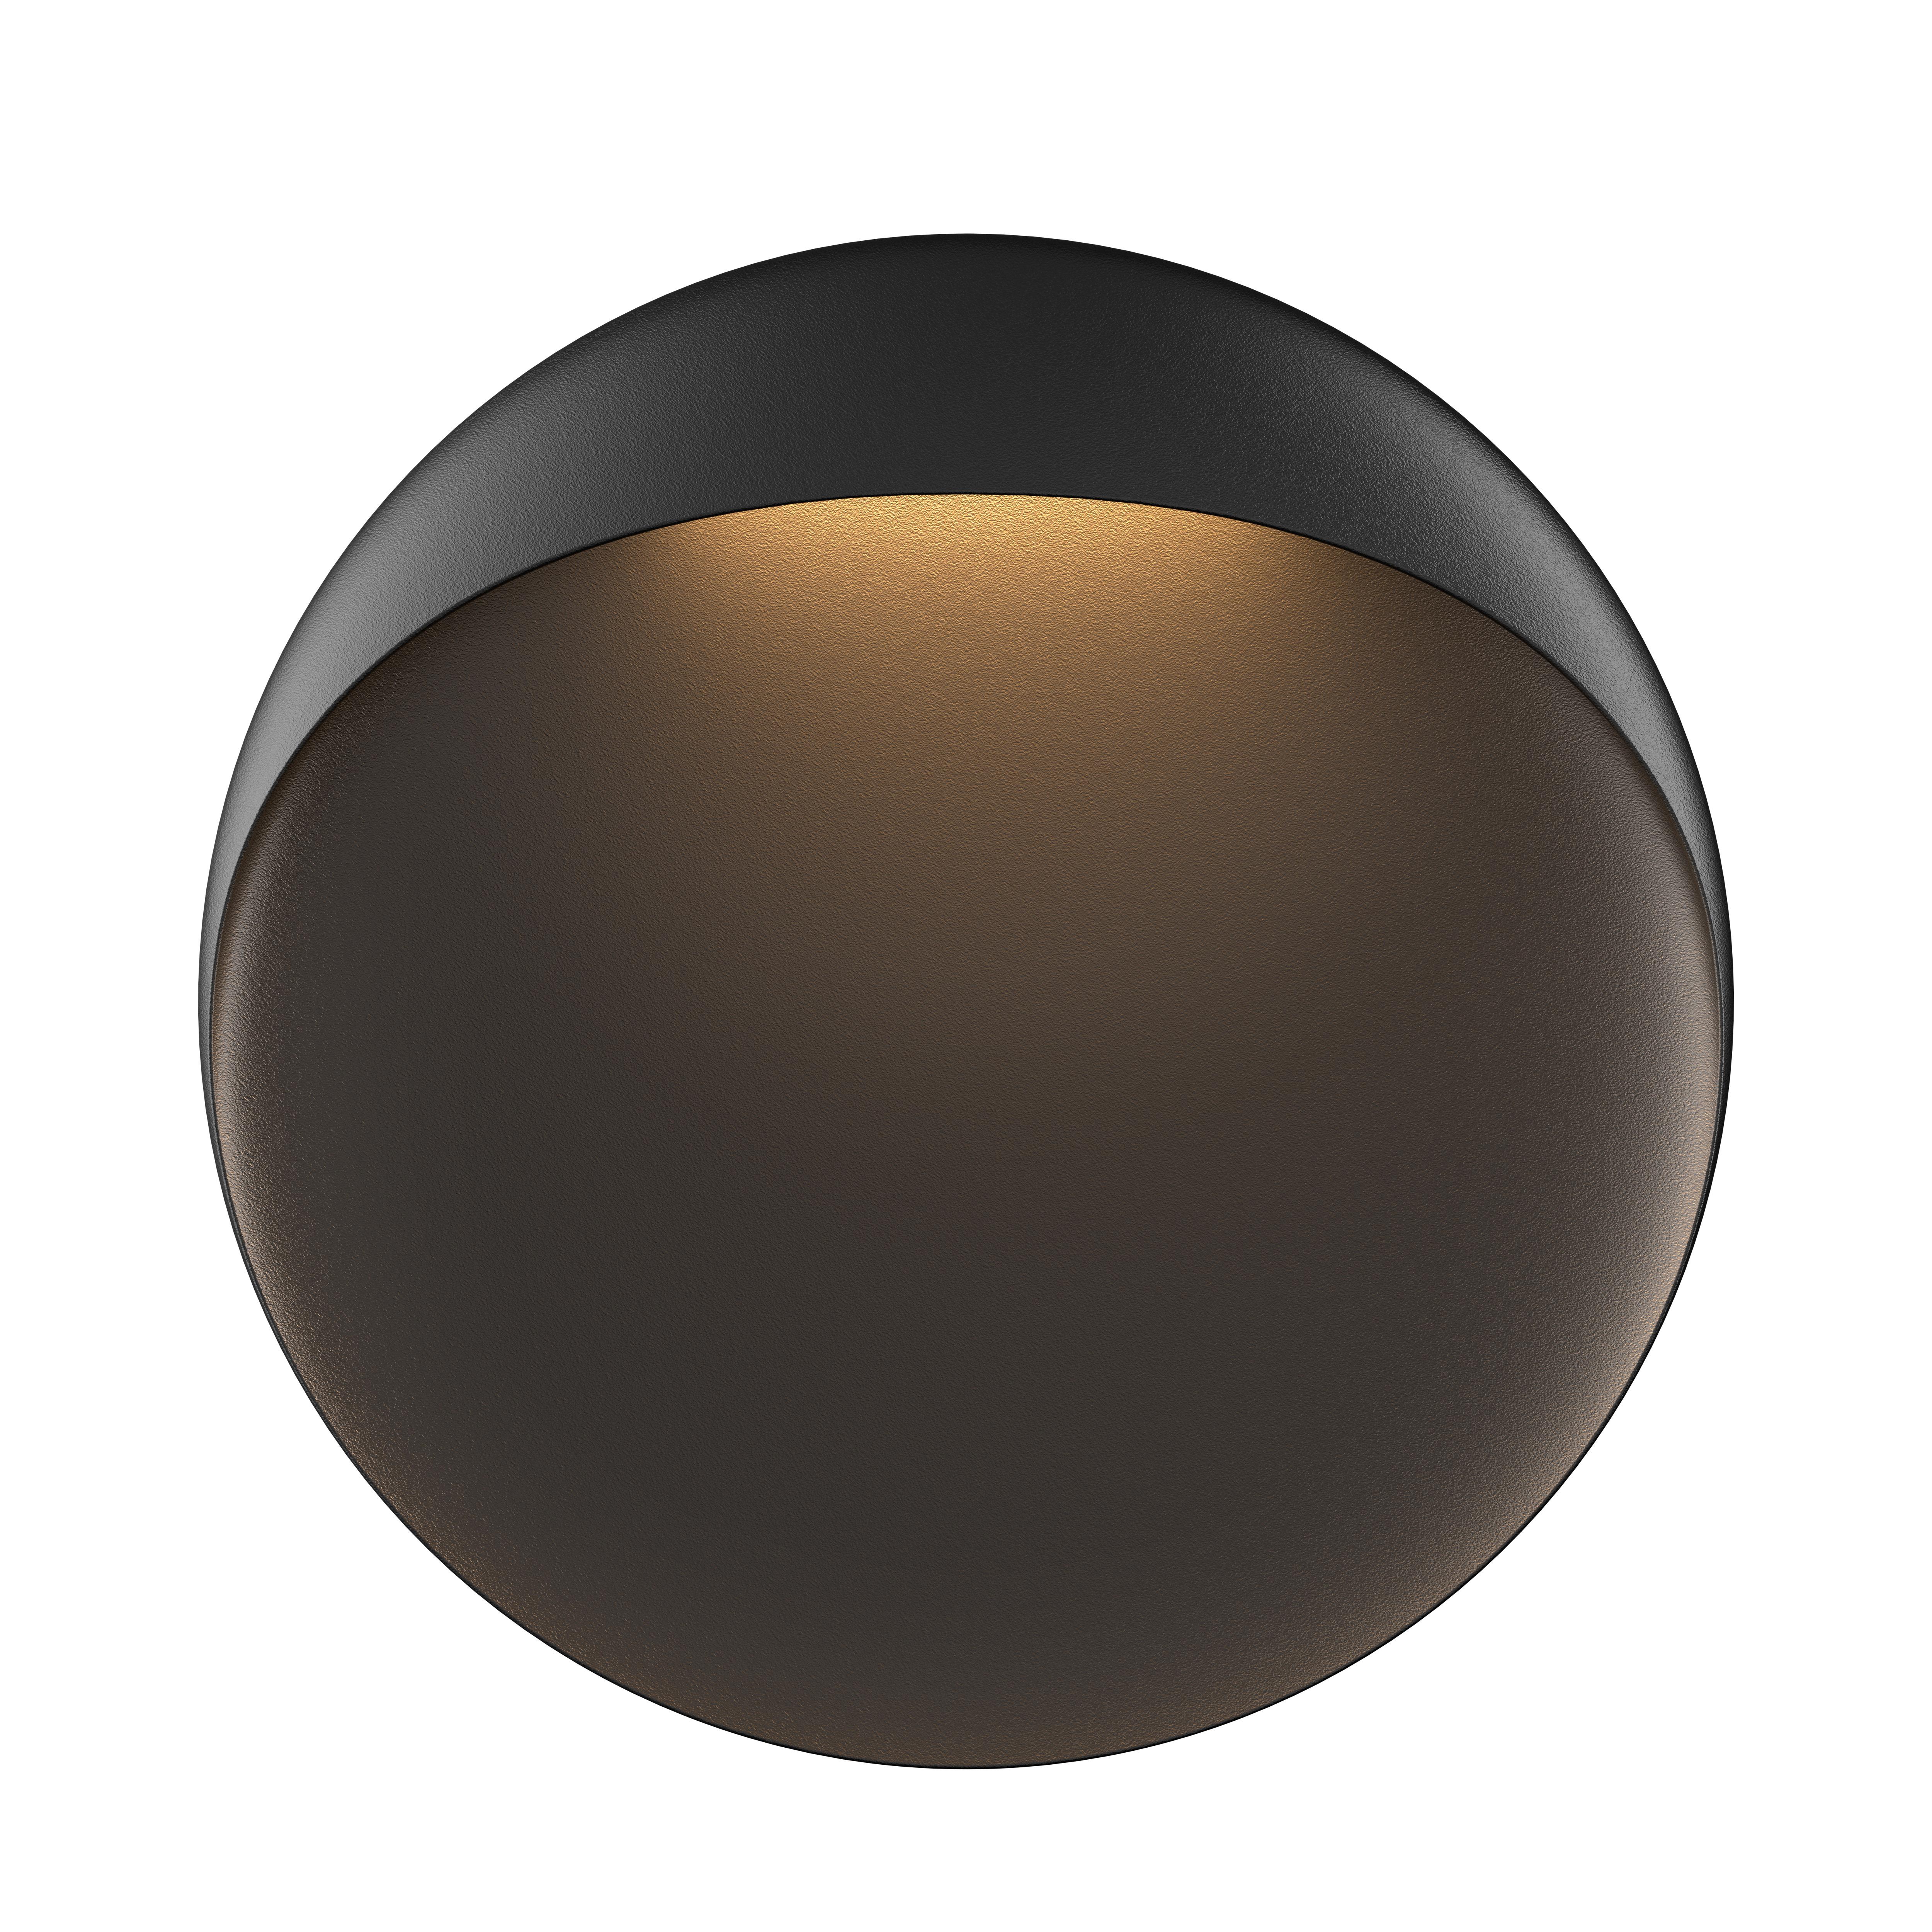 'Flindt' Indoor or Outdoor Wall Light in Black for Louis Poulsen In New Condition For Sale In Glendale, CA